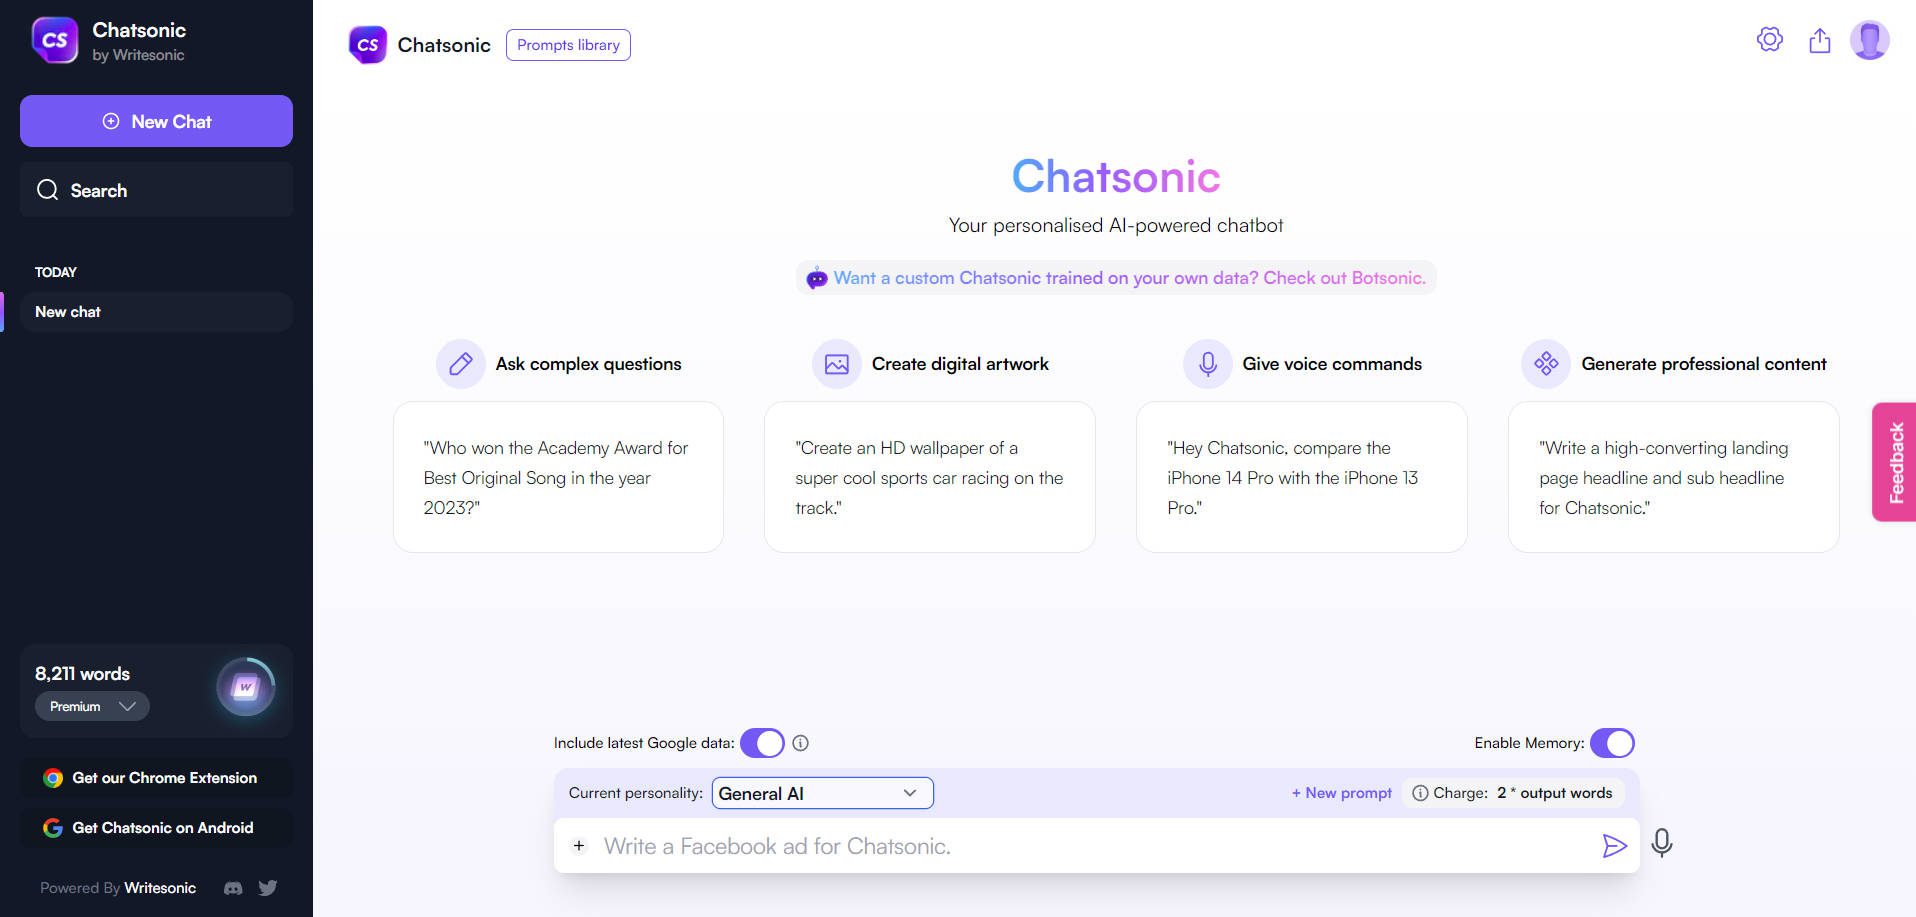 Chatsonic Cluttered UI